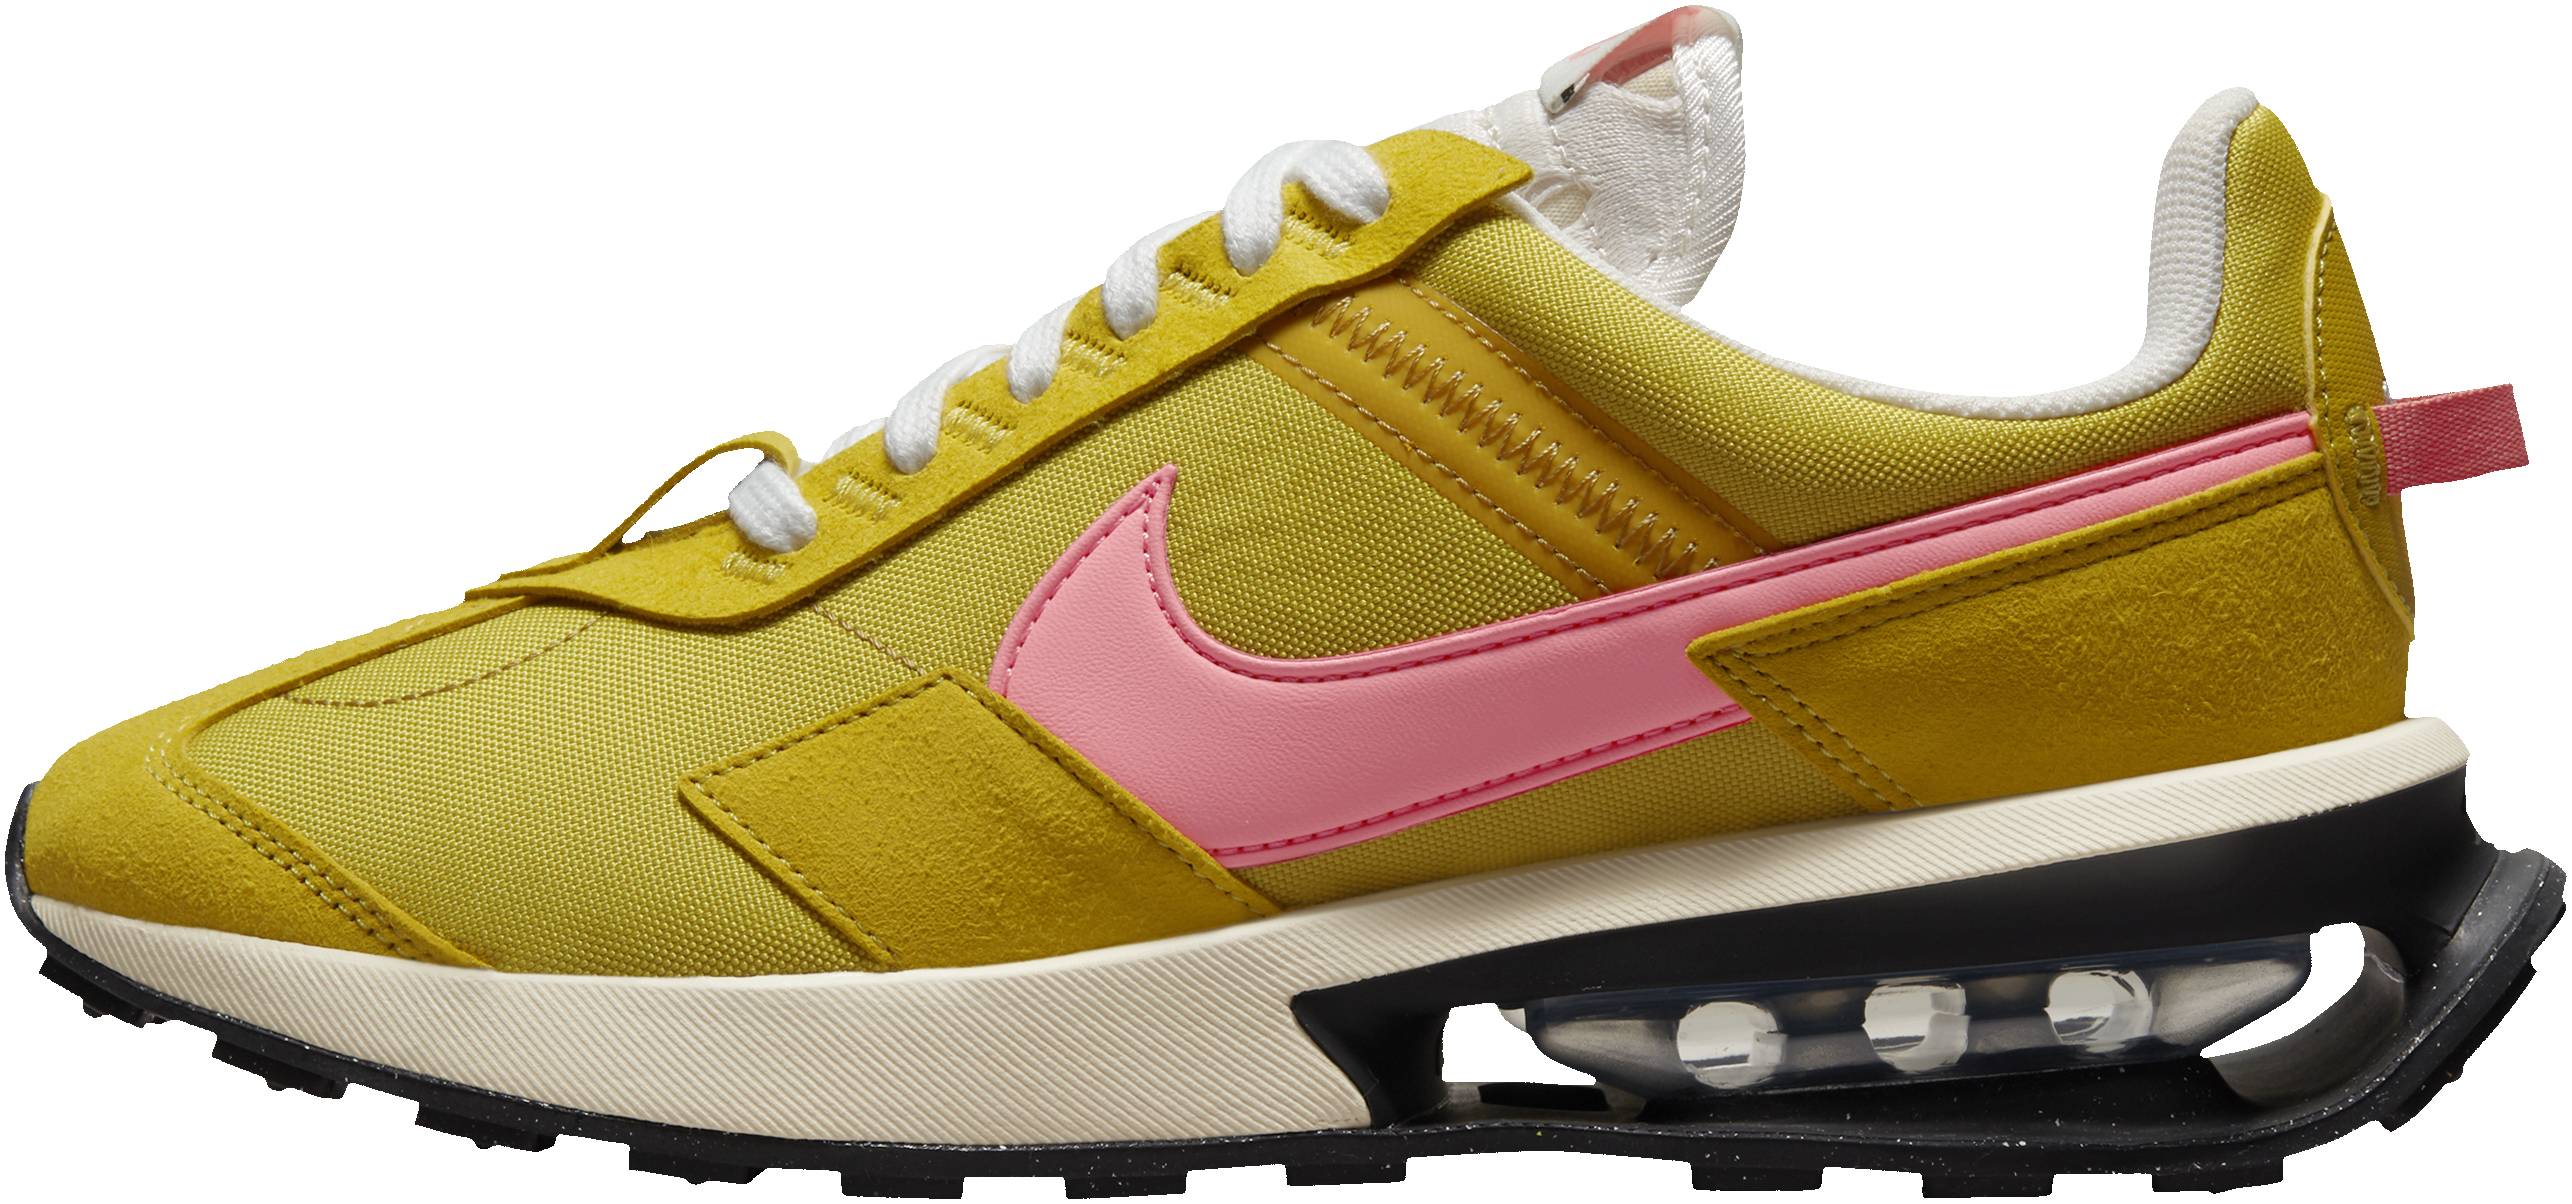 Nike Air Max Pre-Day LX sneakers in 4 